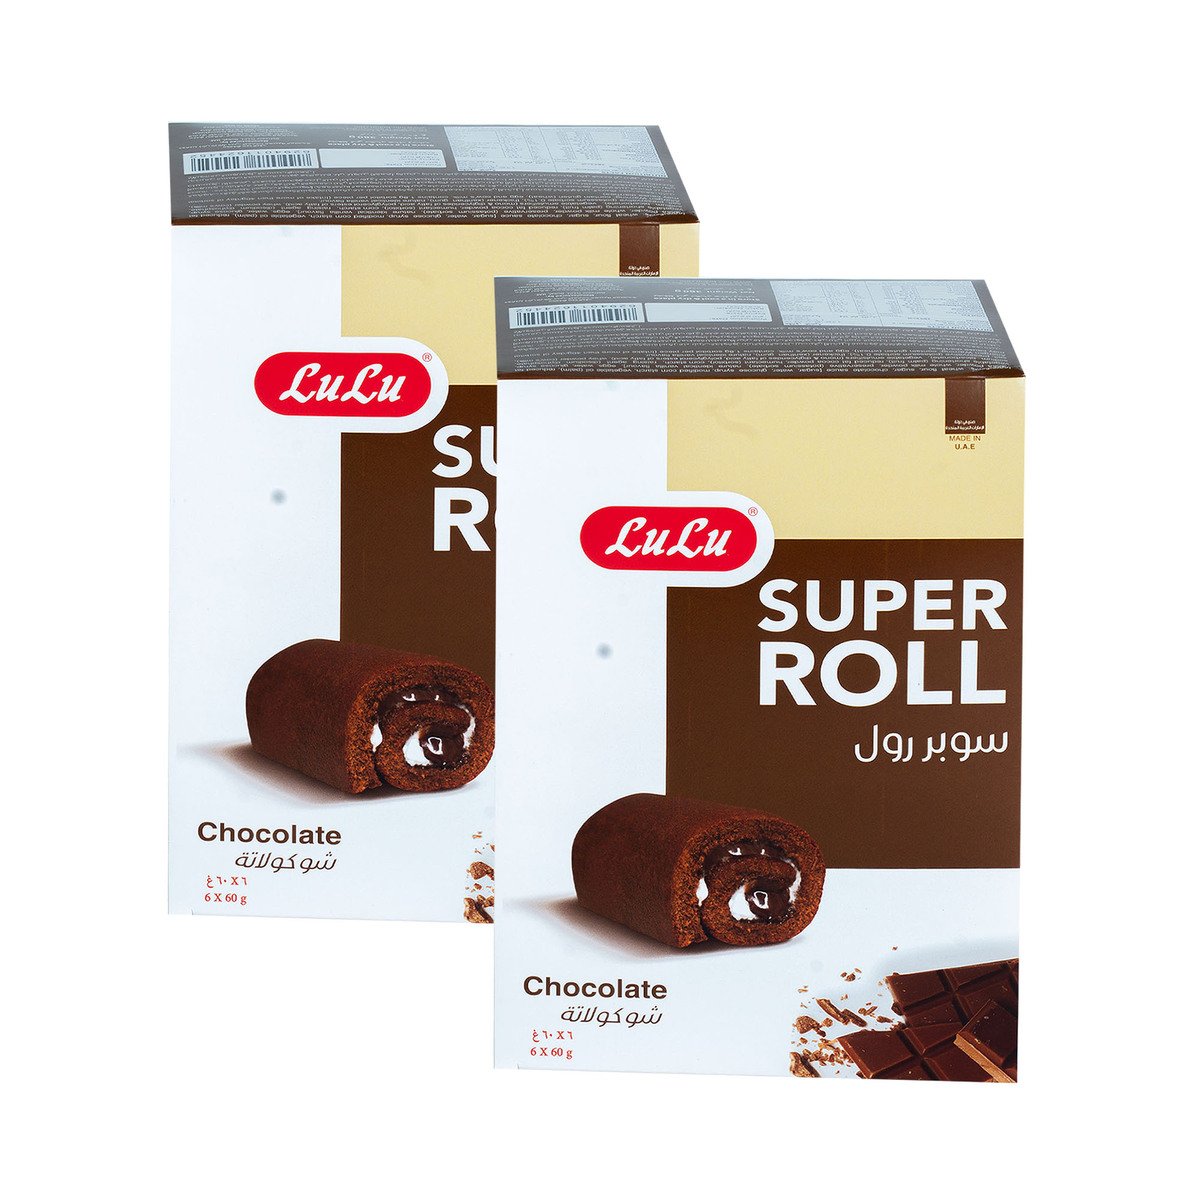 LuLu Super Roll Chocolate 2 x 360 g Online at Best Price, Cakes & Pies